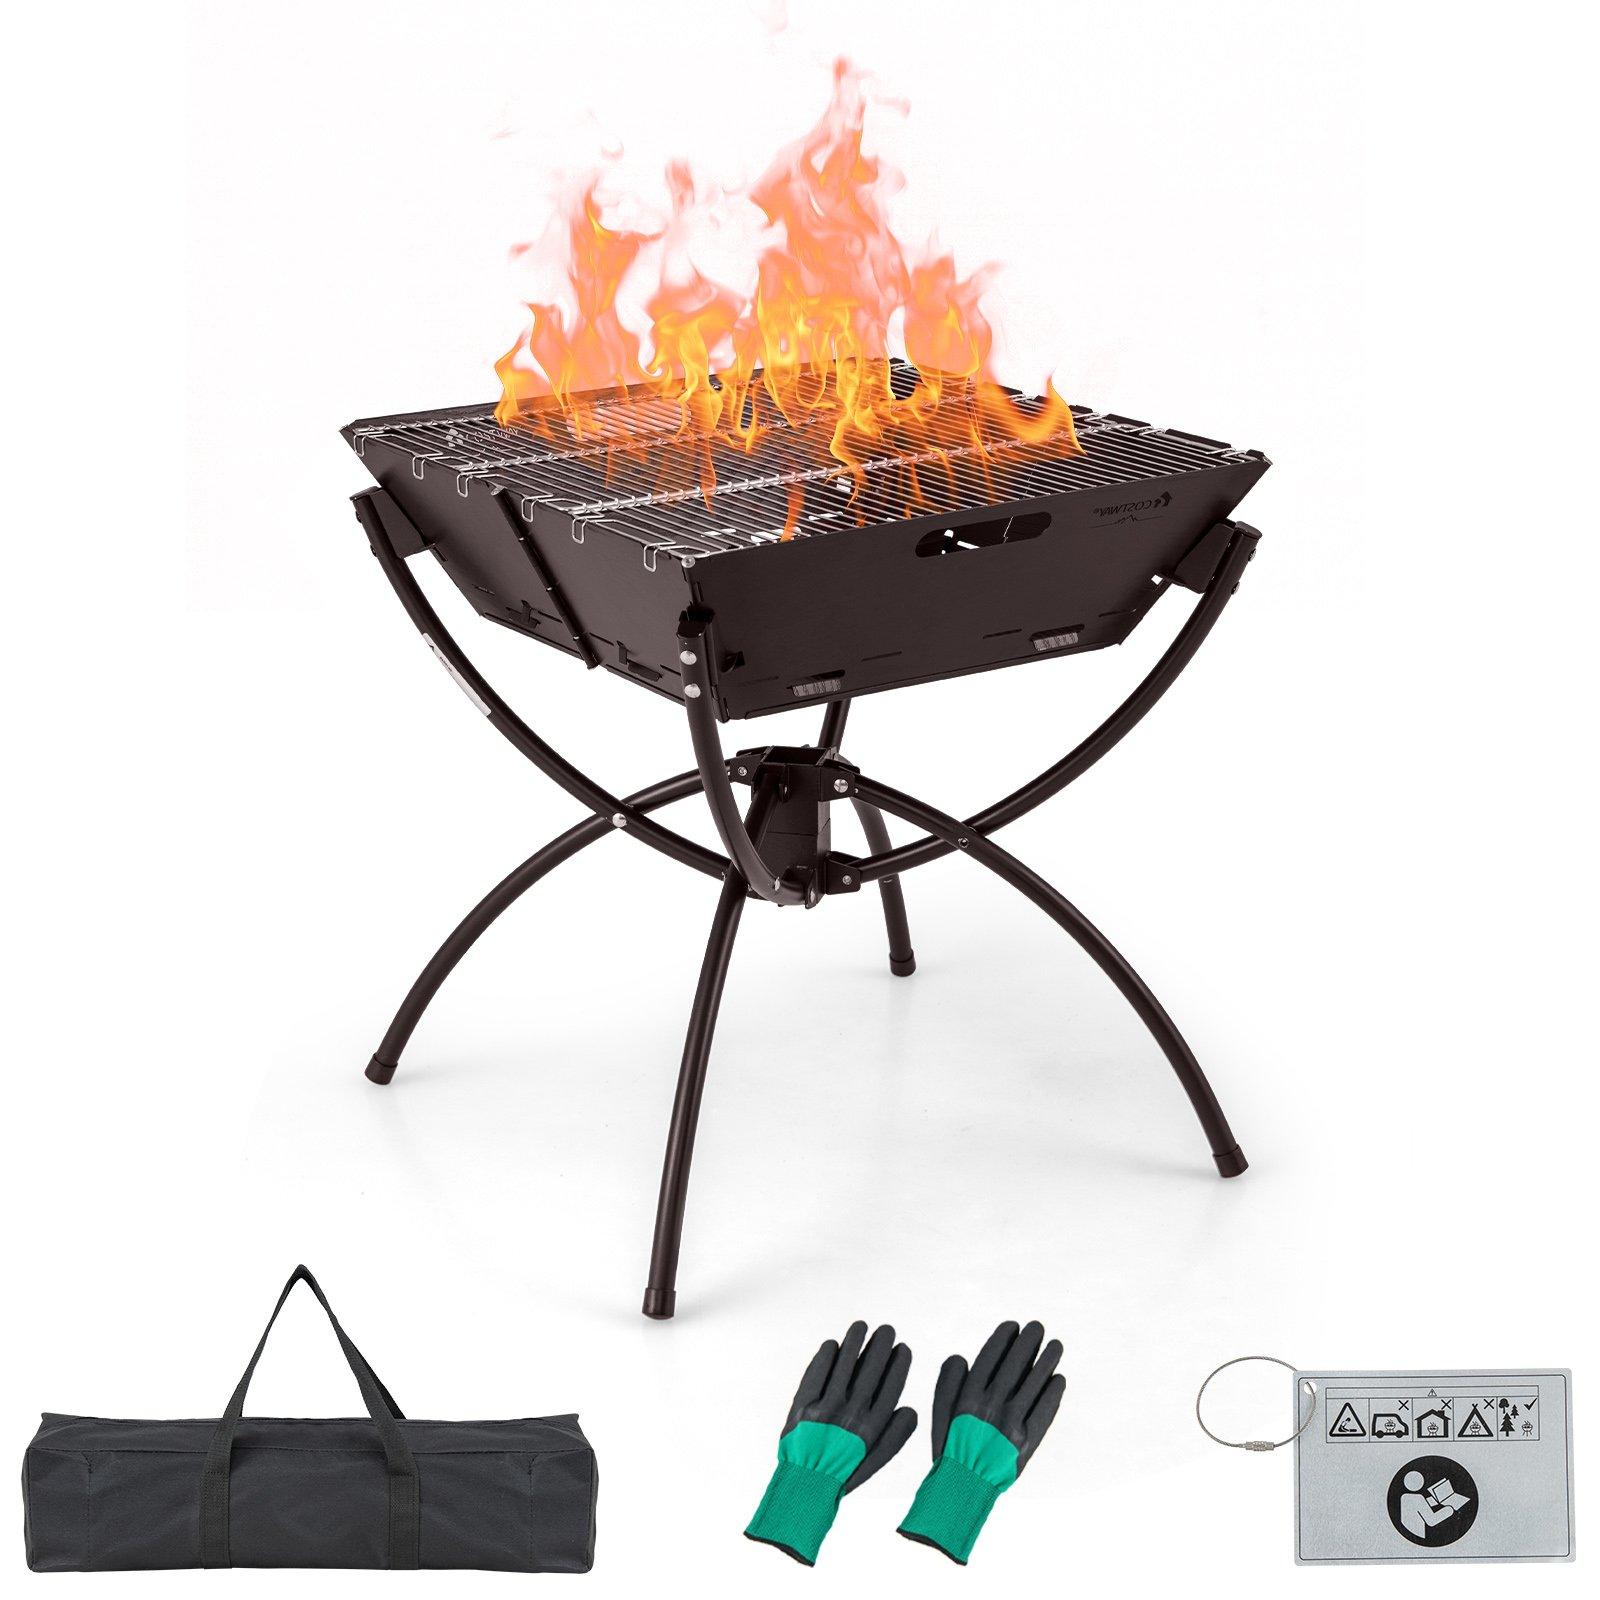 3-In-1 Camping Fire Pit Wood Burning Campfire Portable Grill w/ Cooking Grills